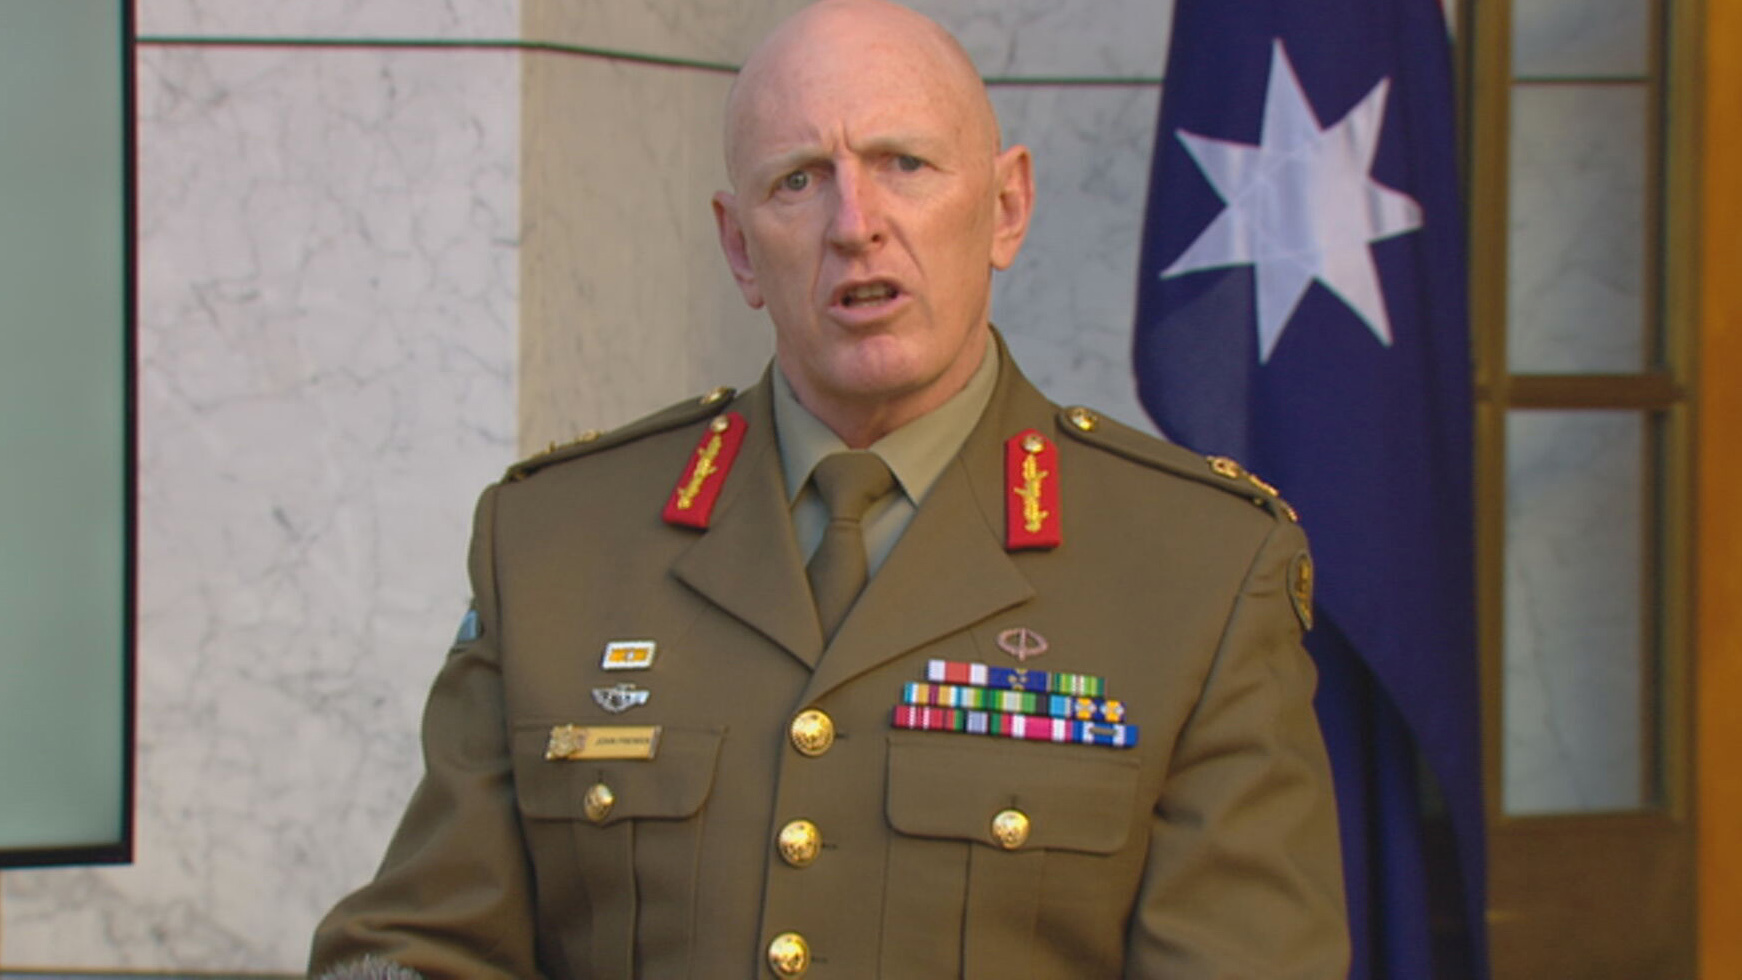 Vaccine rollout commander Lieutenant-General John Frewen said the "sense of momentum is very real" in the ongoing jab campaign.